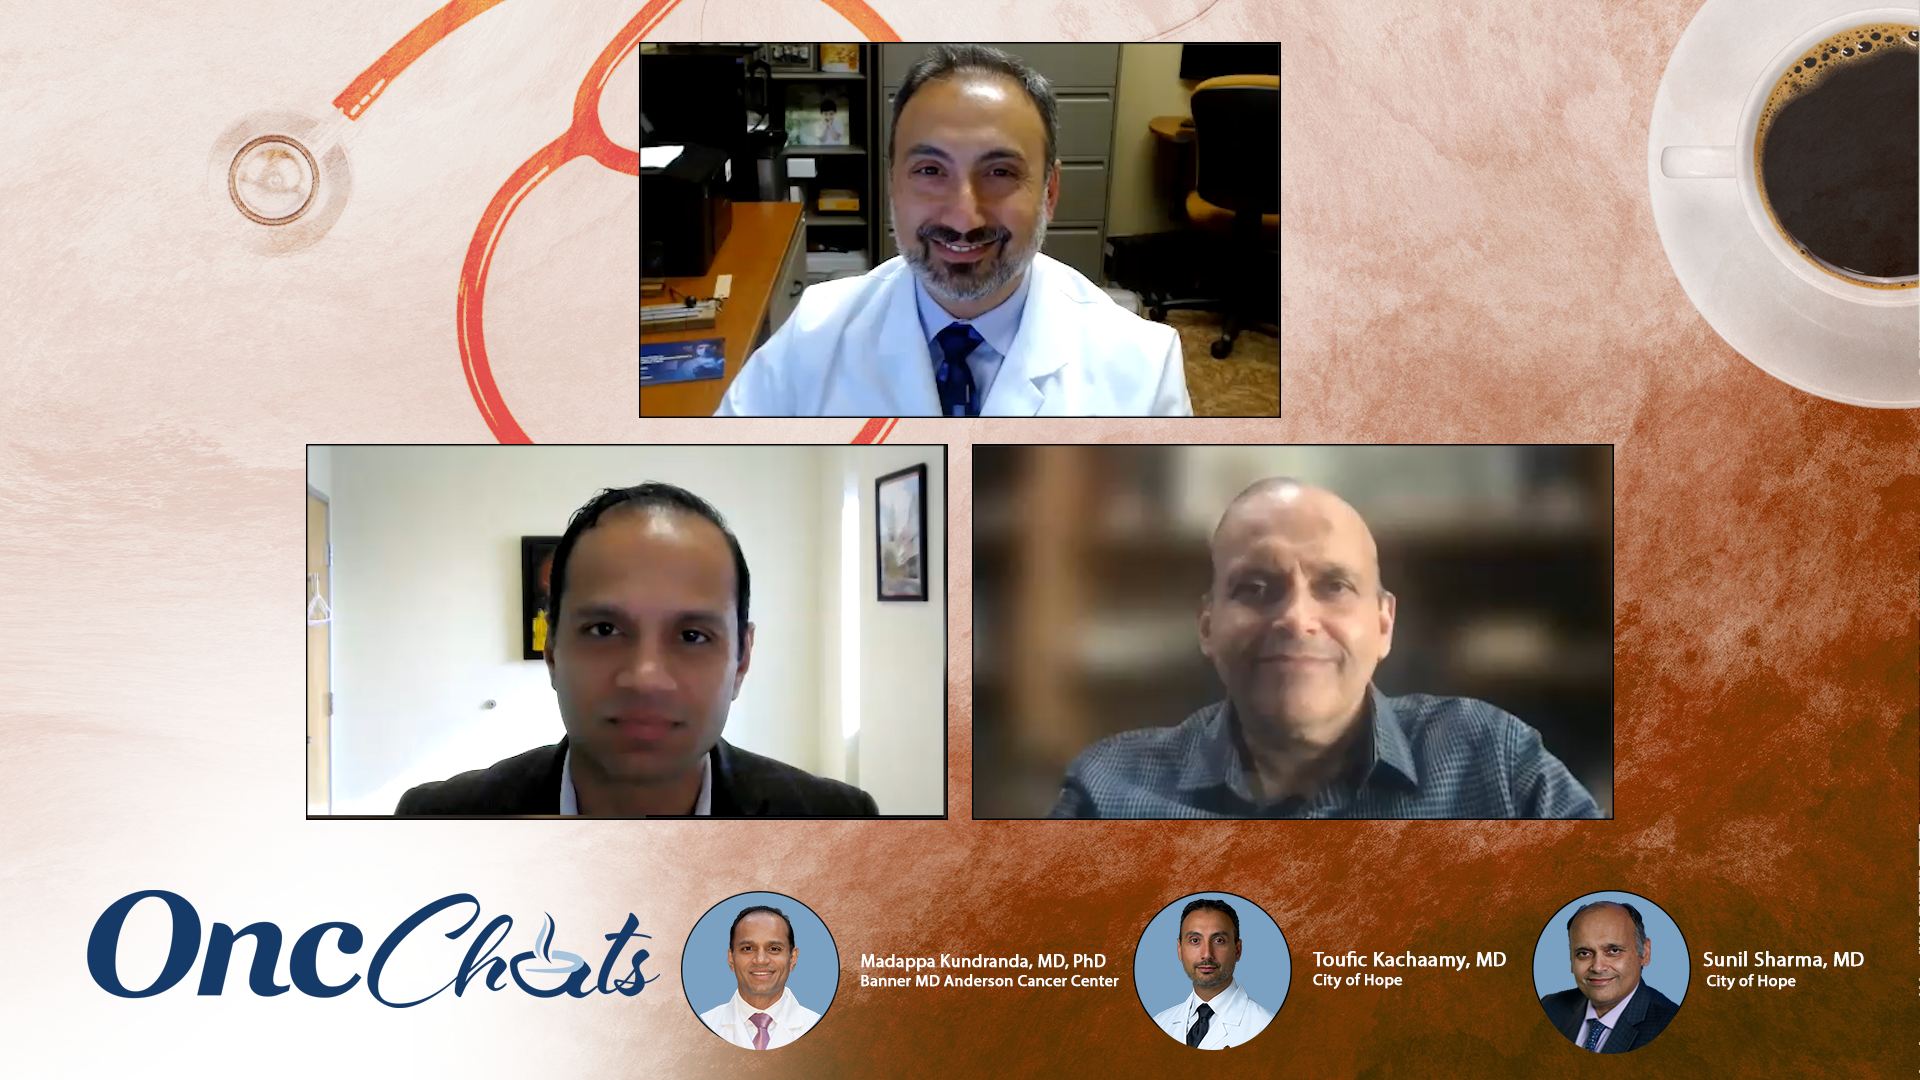 In this series of OncChats: Leveraging Immunotherapy in GI Malignancies, Toufic Kachaamy, MD, Sunil Sharma, MD, and Madappa Kundranda, MD, PhD, discuss early detection with multiomic assays and leveraging immunotherapy in gastrointestinal cancers.